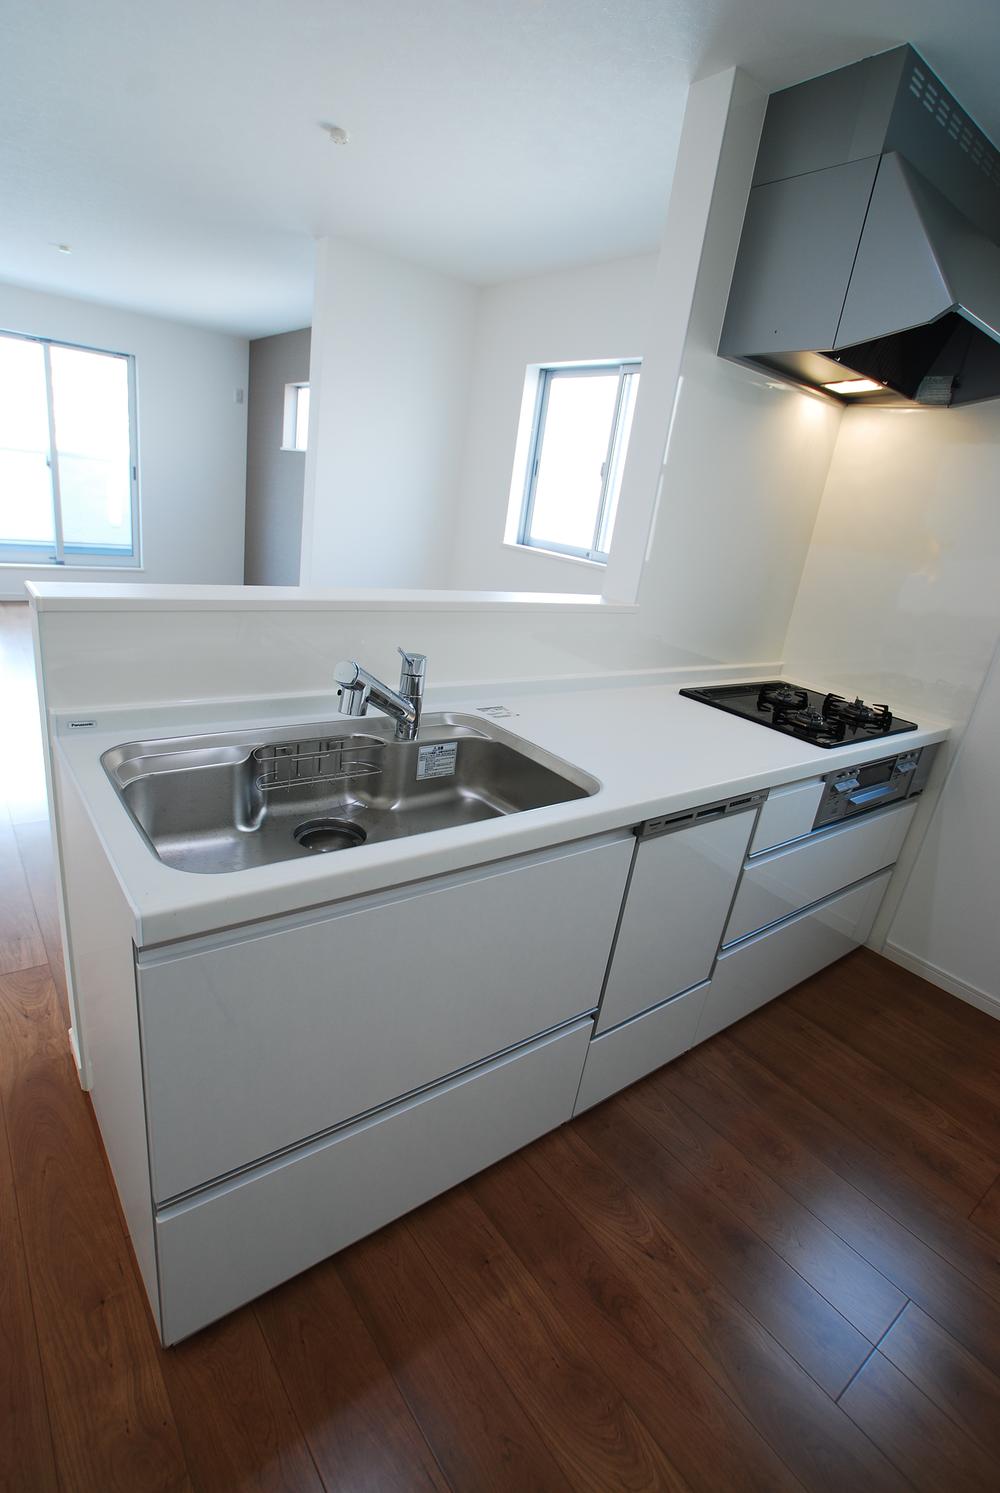 Same specifications photo (kitchen). Room (August 2013) Shooting And a water purifier built-in mixing faucet, Dish washing dryer, Standard equipped with a glass top stove